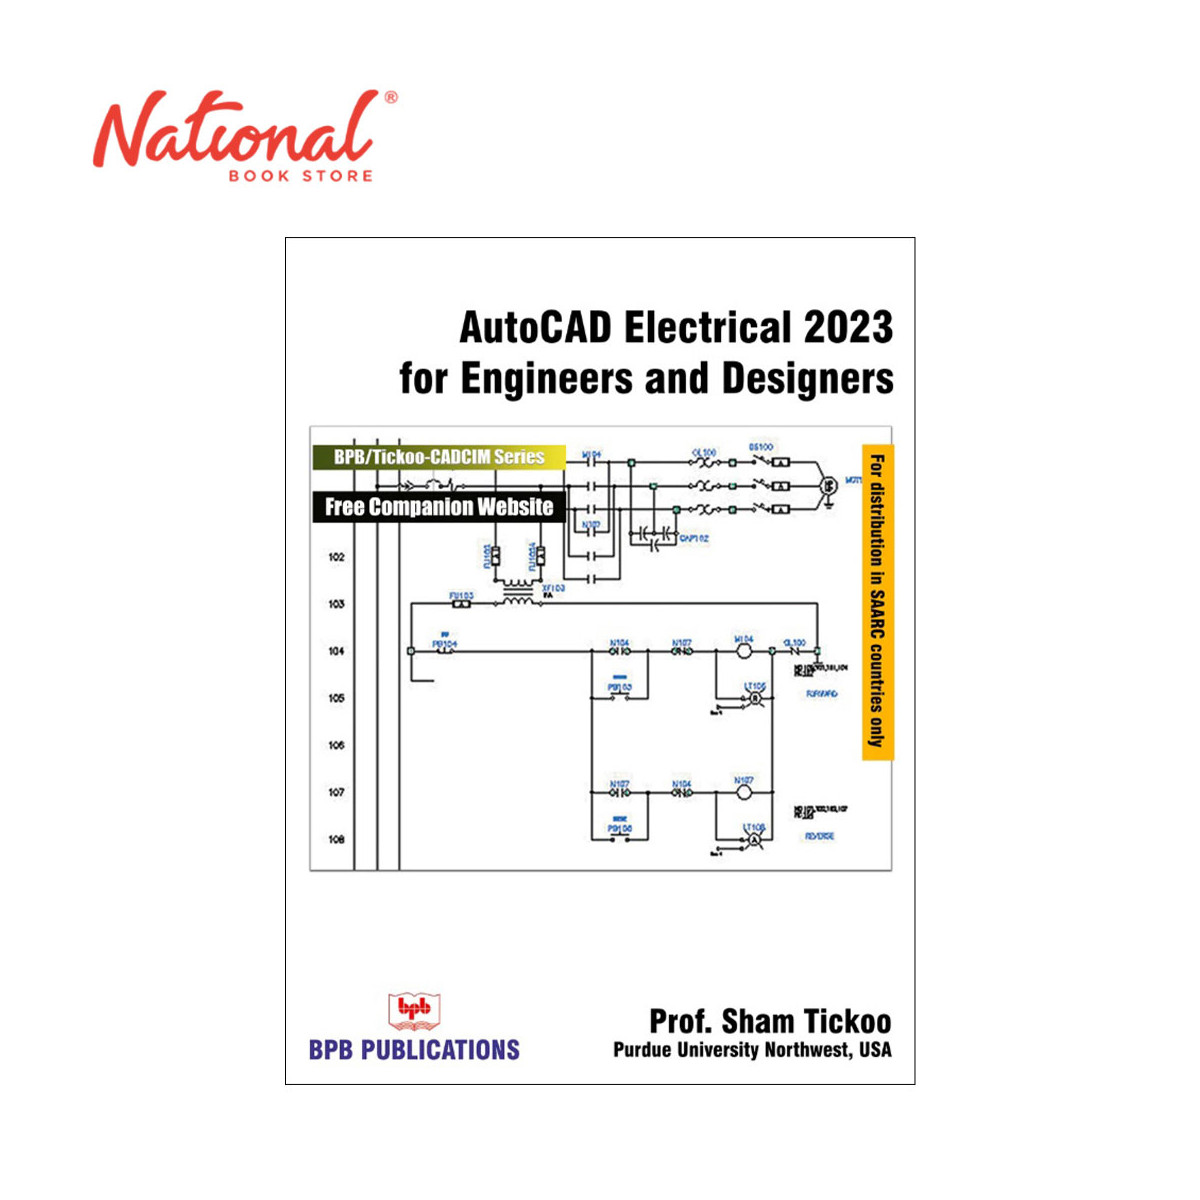 AutoCAD Electrical 2023 for Engineers and Designers by Prof. Sham Tickoo - Trade Paperback